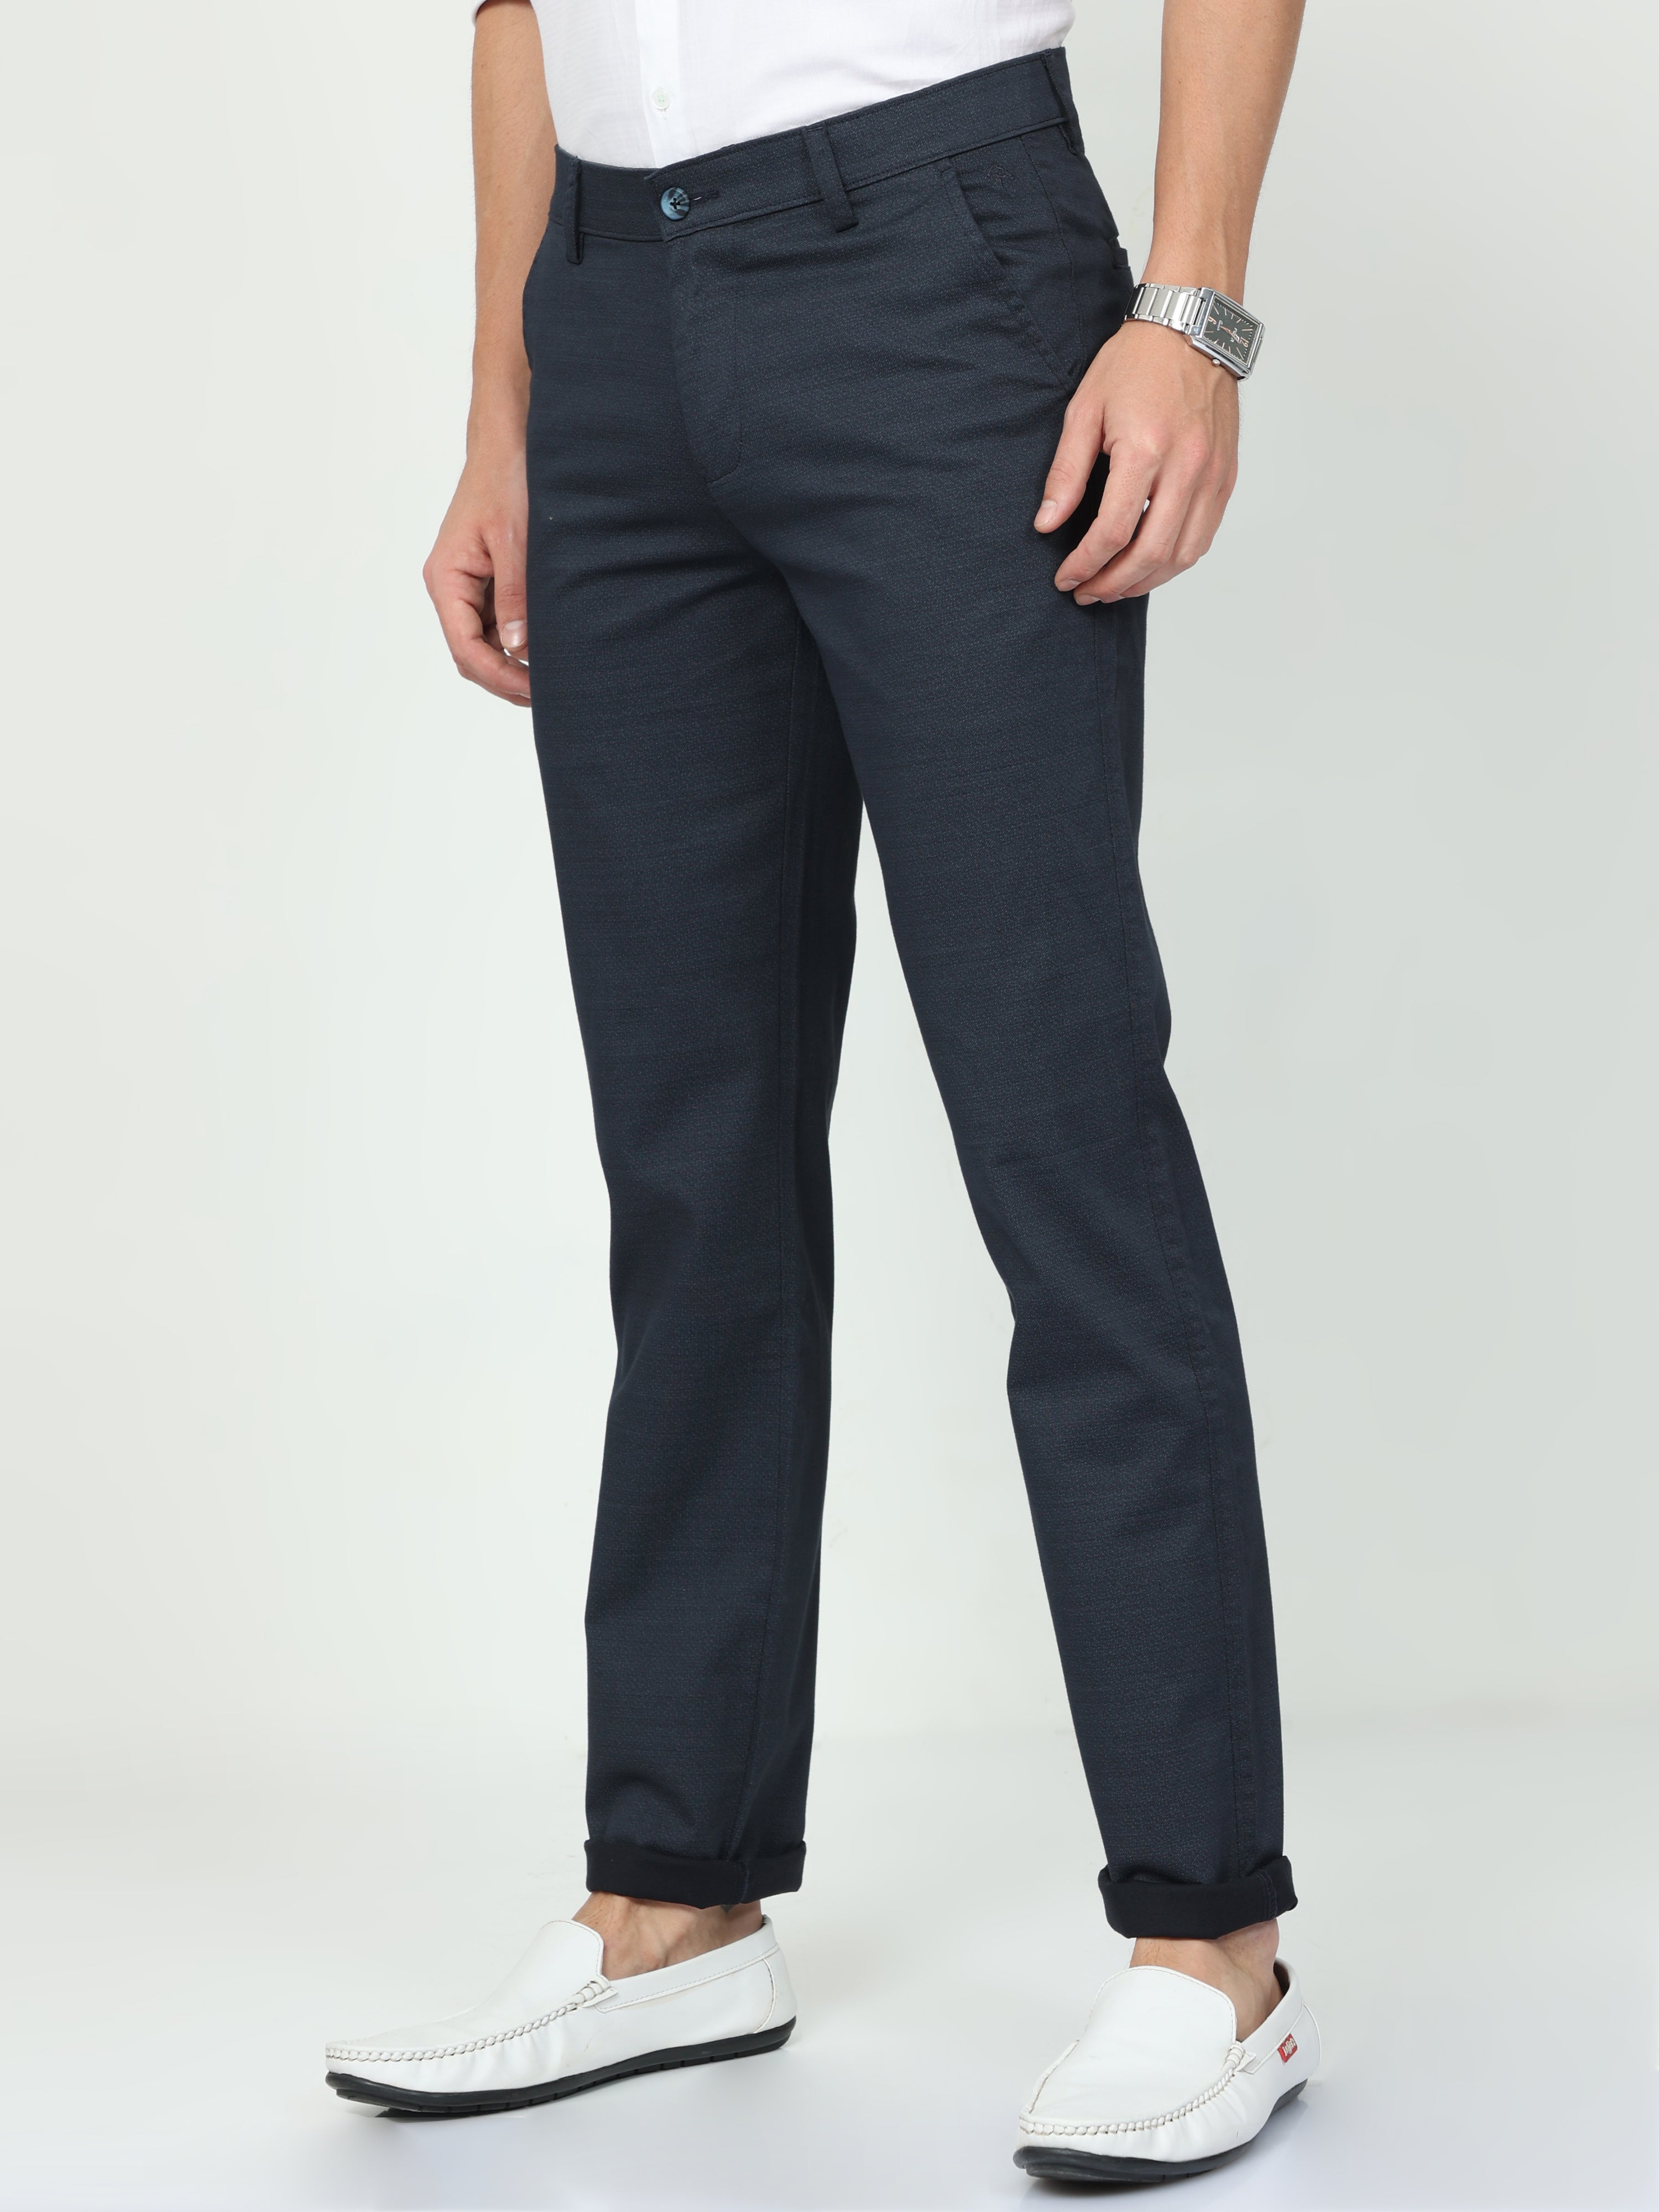 CP BRO Mens Chiesel Fit Solid Navy Color Trousers | Tbo2-13 E-Nvy-Cf-Ly